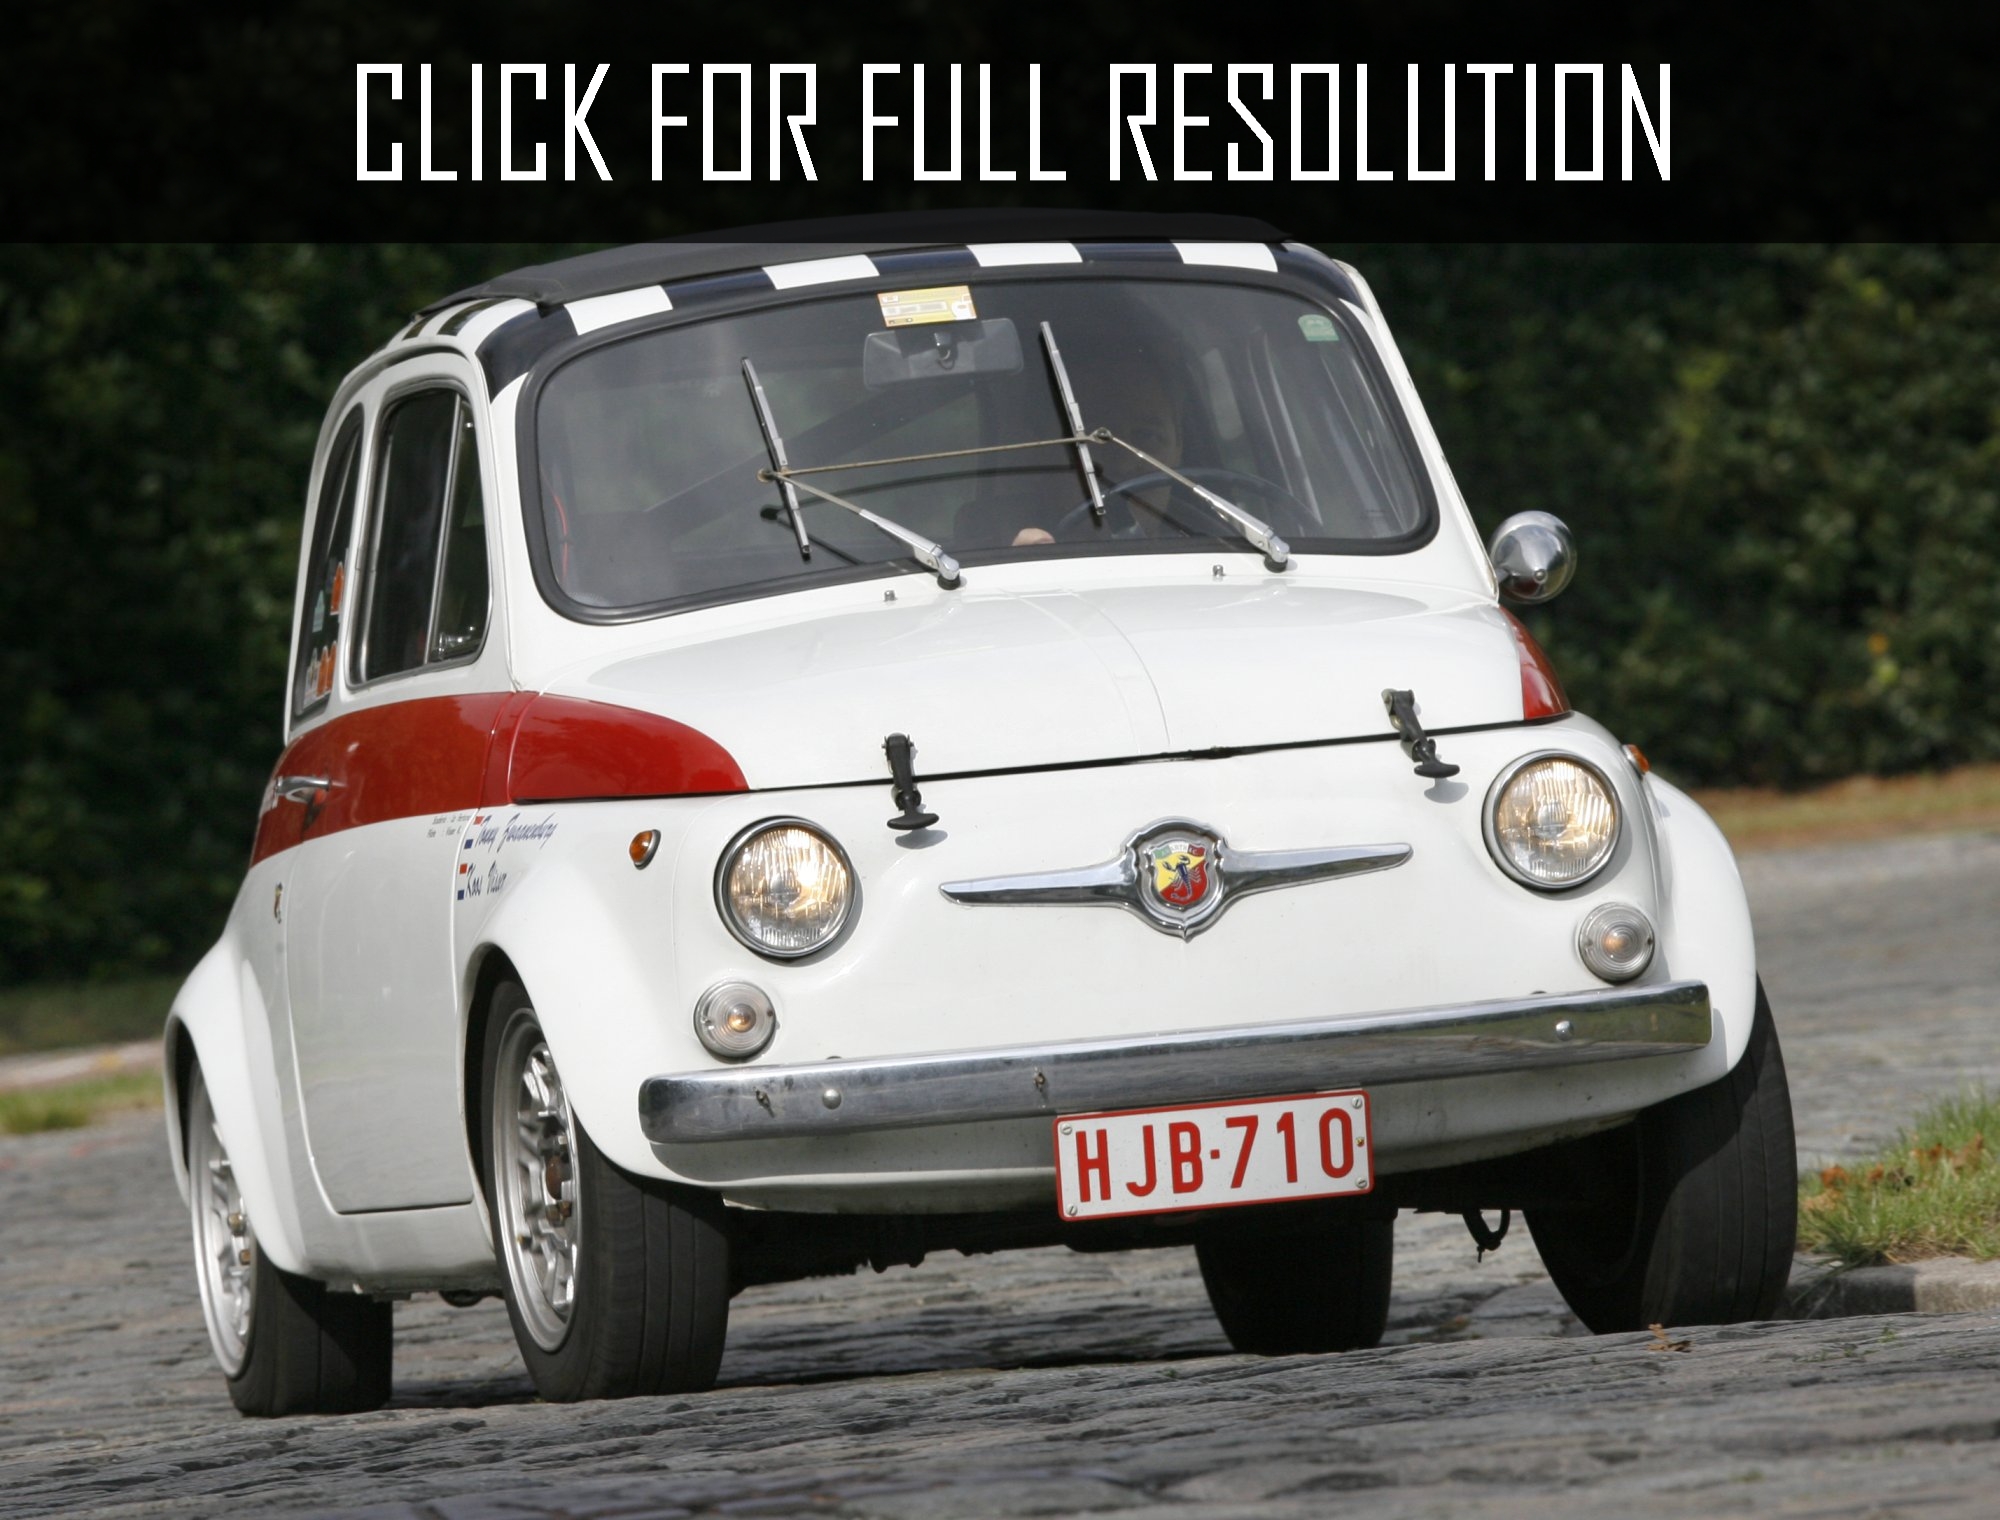 1960 Fiat 500 Abarth news, reviews, msrp, ratings with